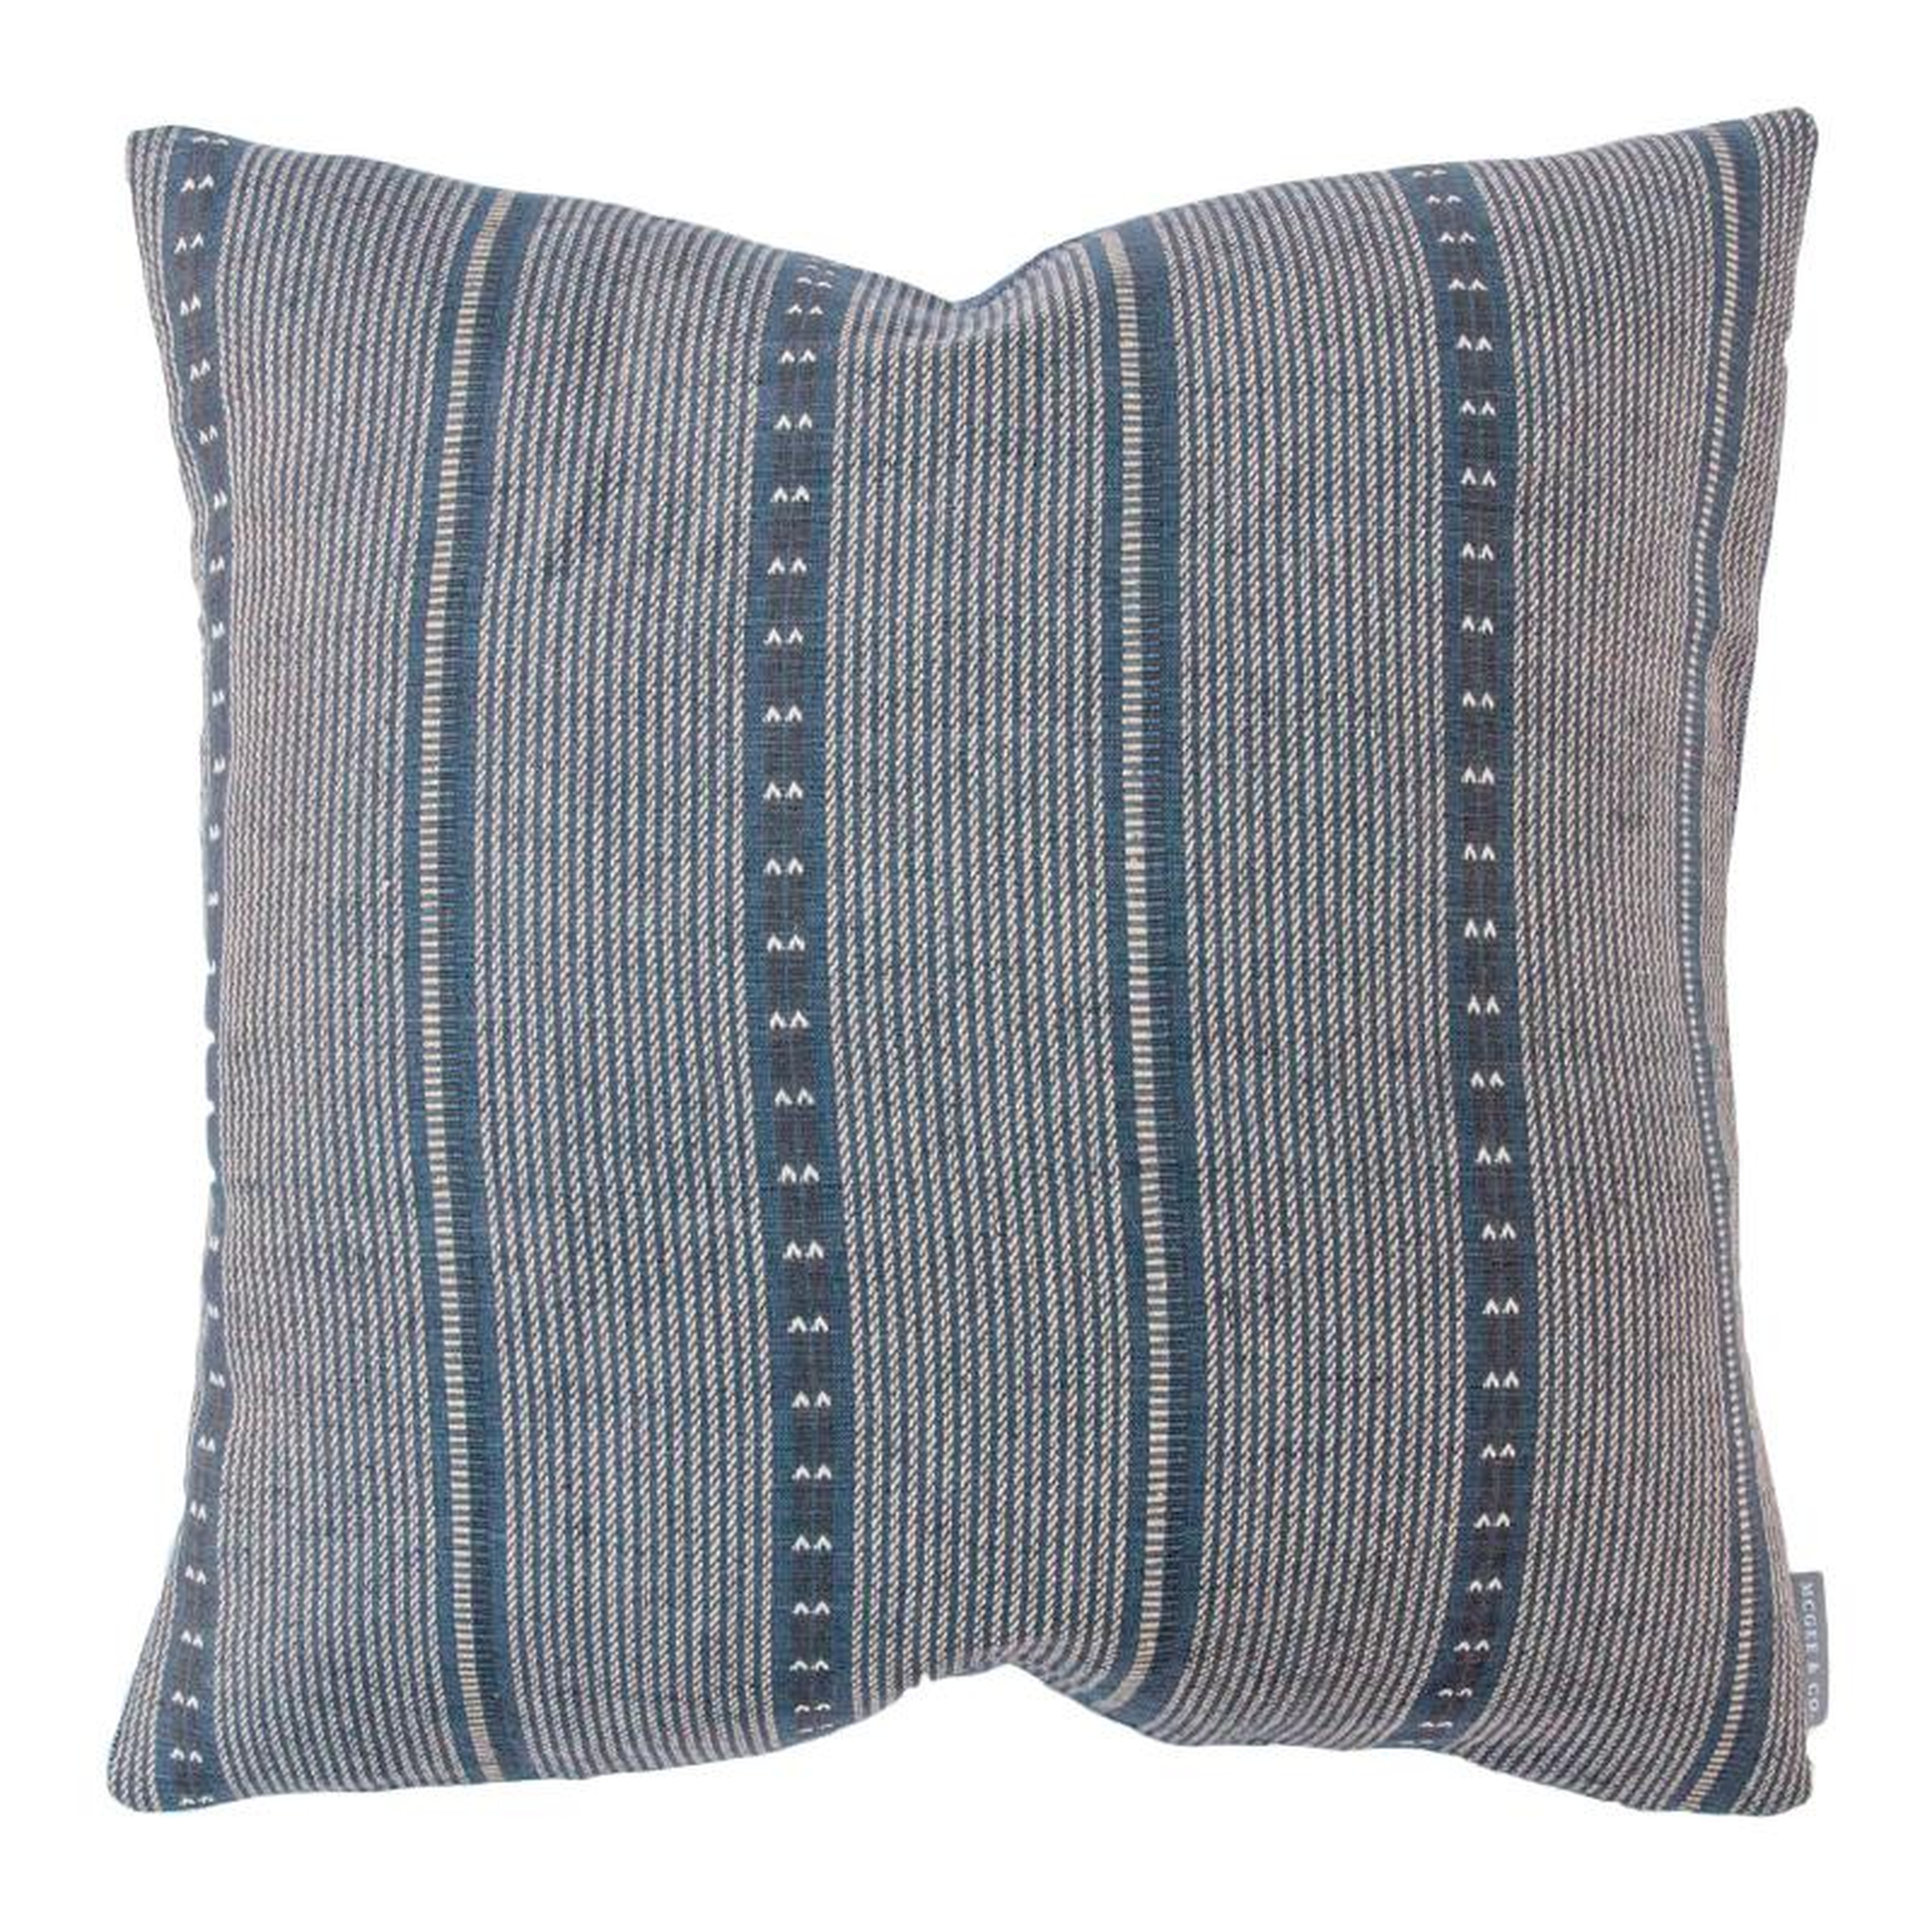 DORIAN PILLOW WITHOUT INSERT, 24" x 24" - McGee & Co.